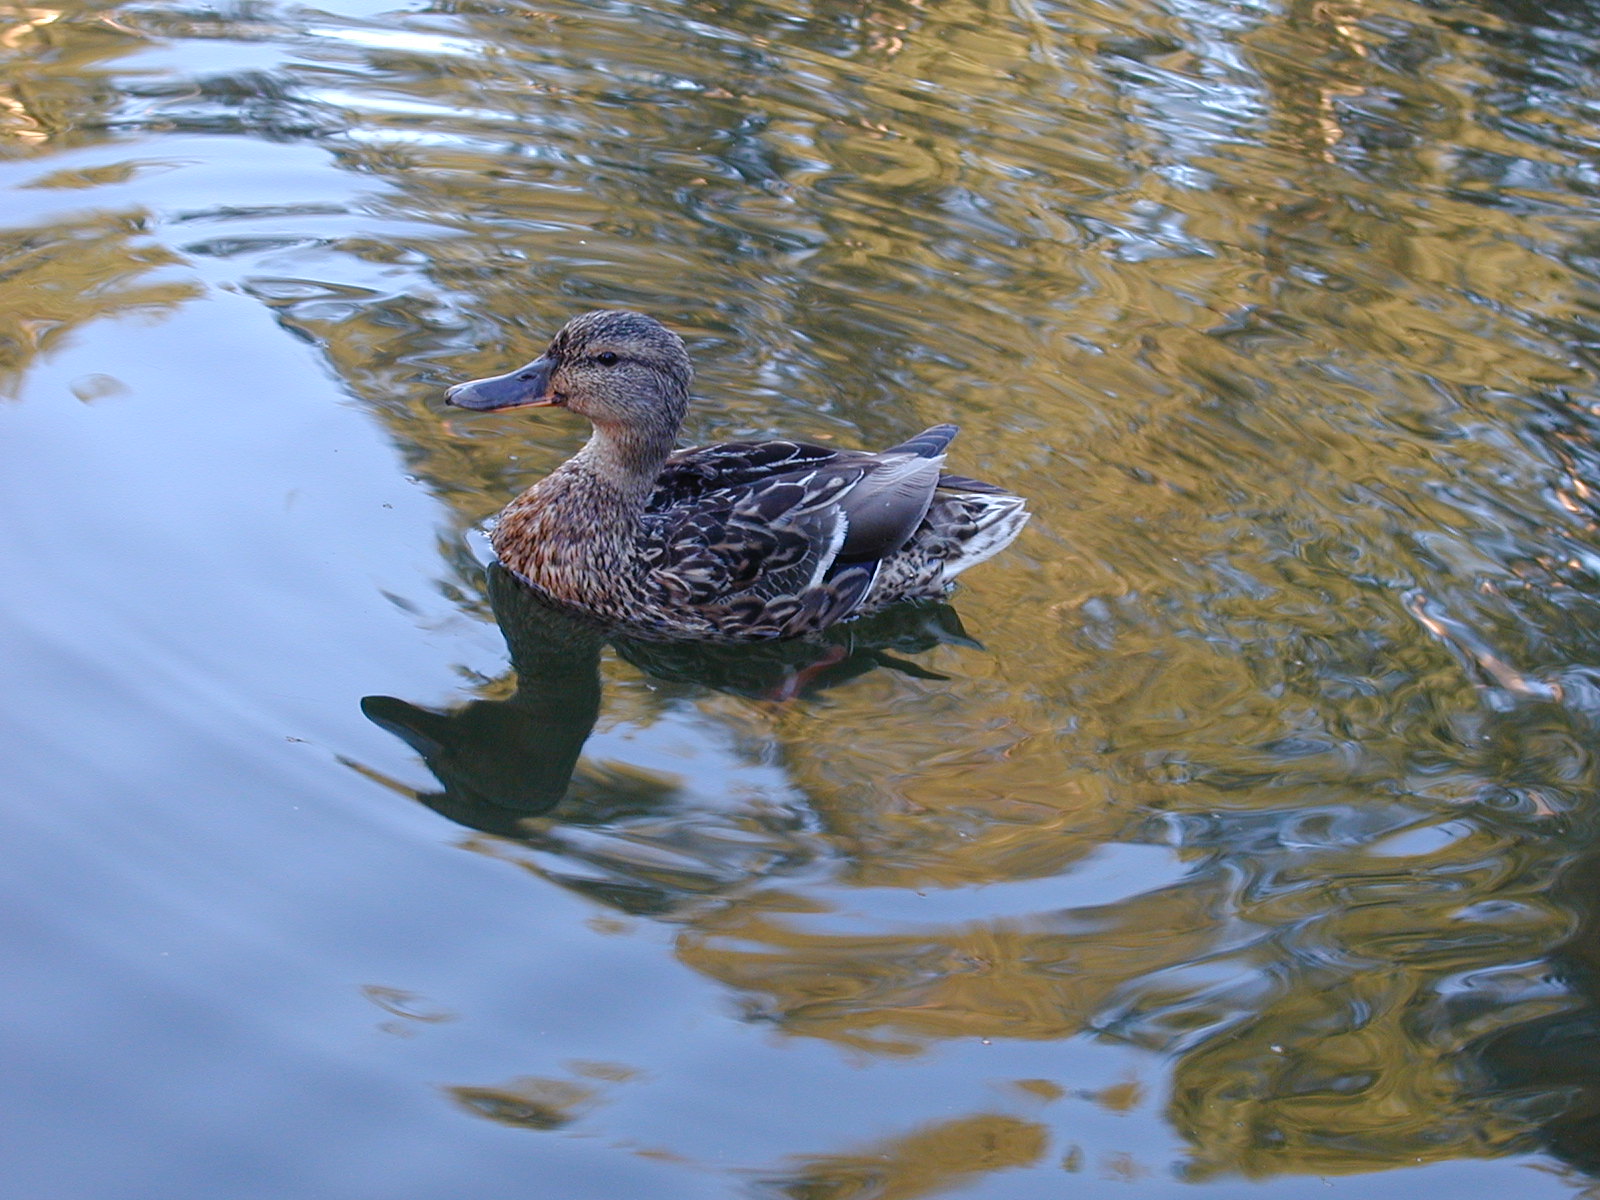 the duck is floating in the water alone